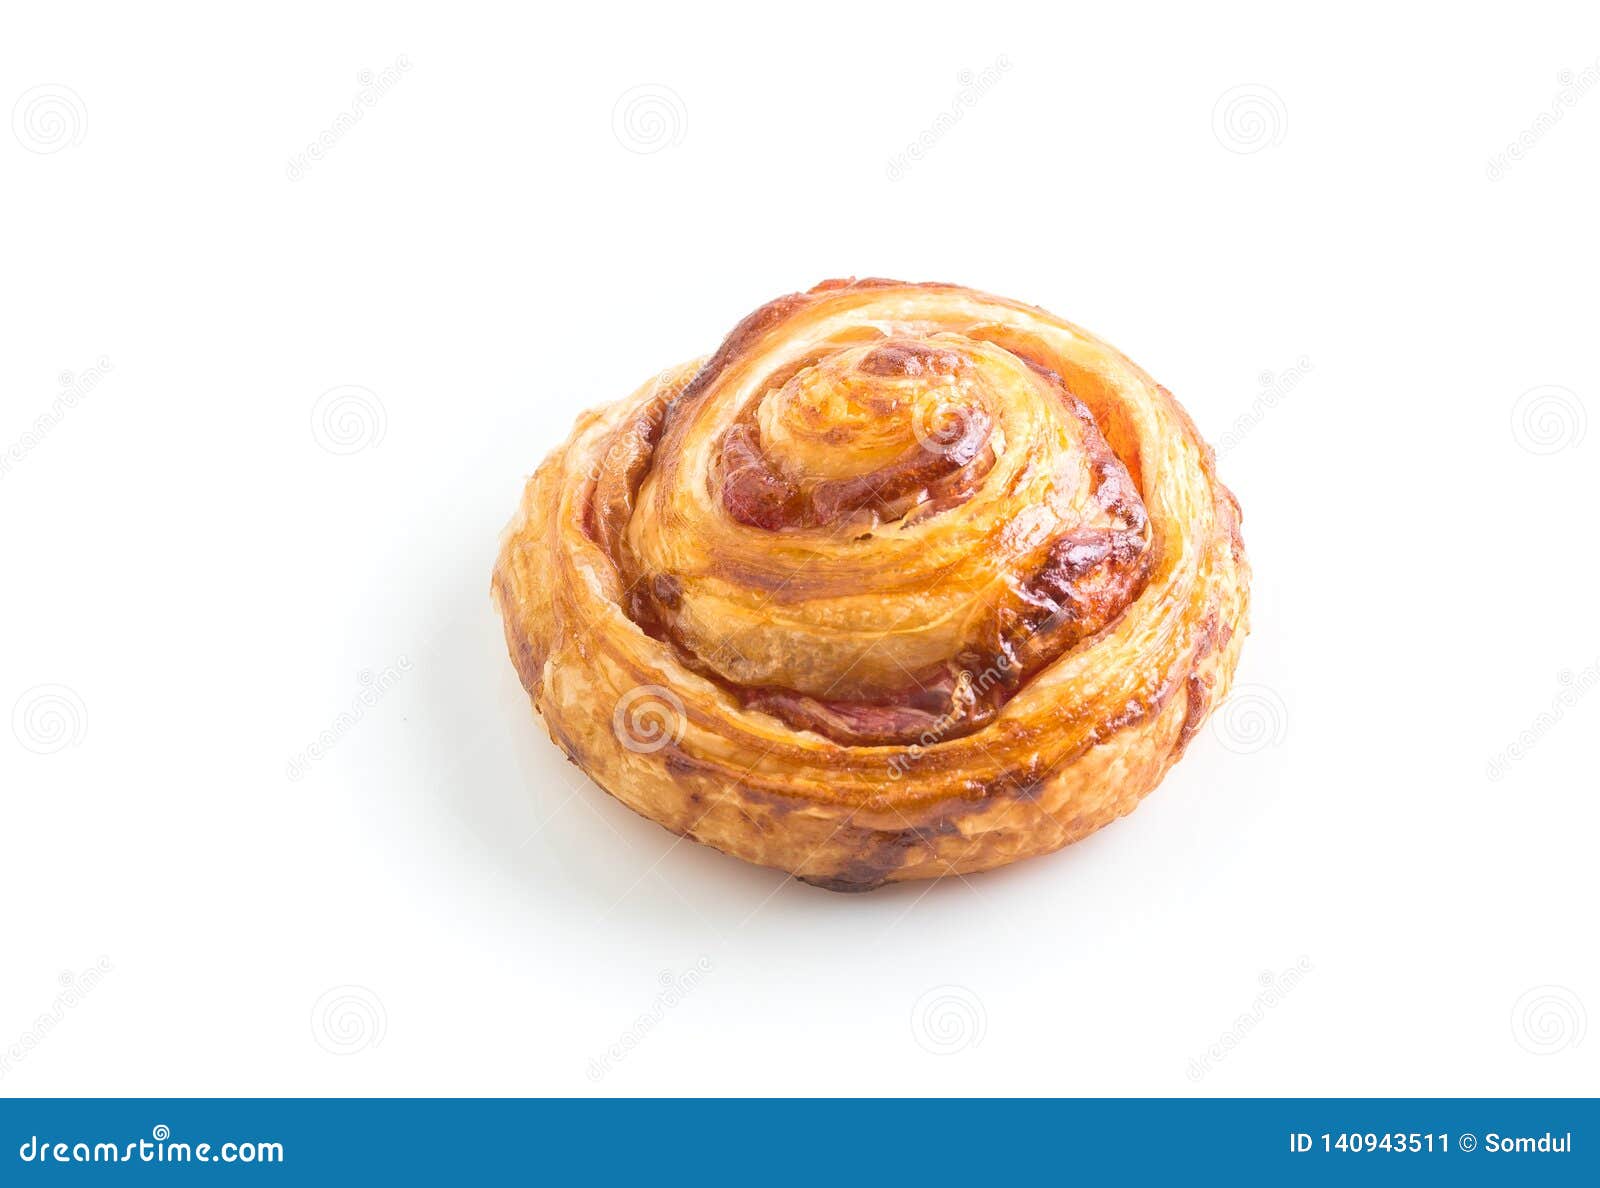 Danish Pastry on White Background Stock Image - Image of plate, pastry:  140943511